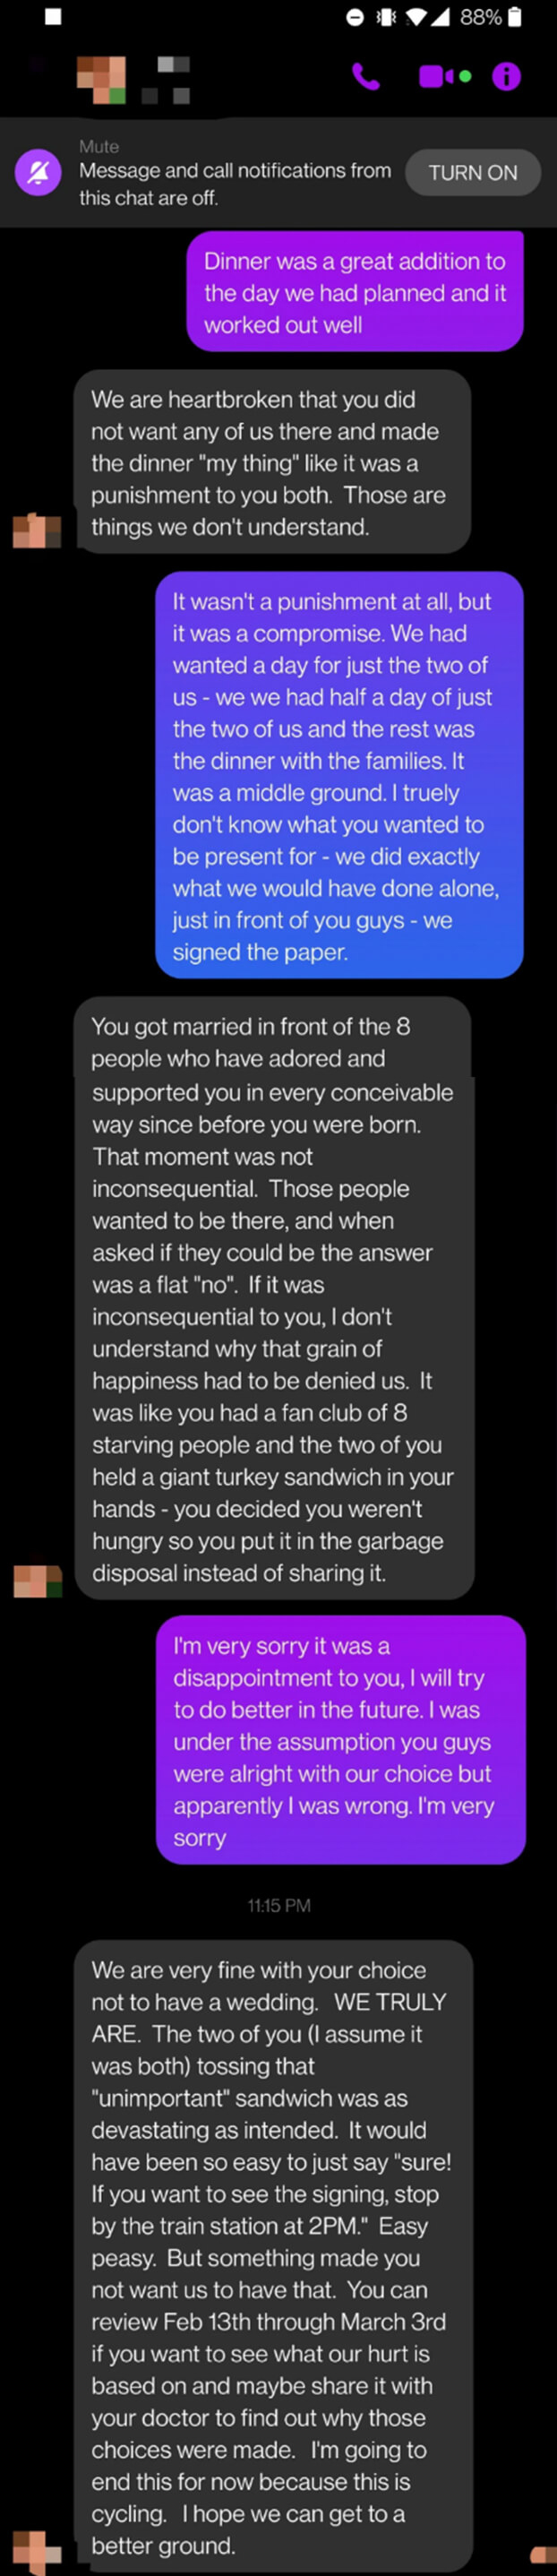 The mother wanted to be present for the signing of the marriage certificate, and she equated not being invited to it to the bride having a sandwich and instead of giving it to starving people, throwing it in the trash